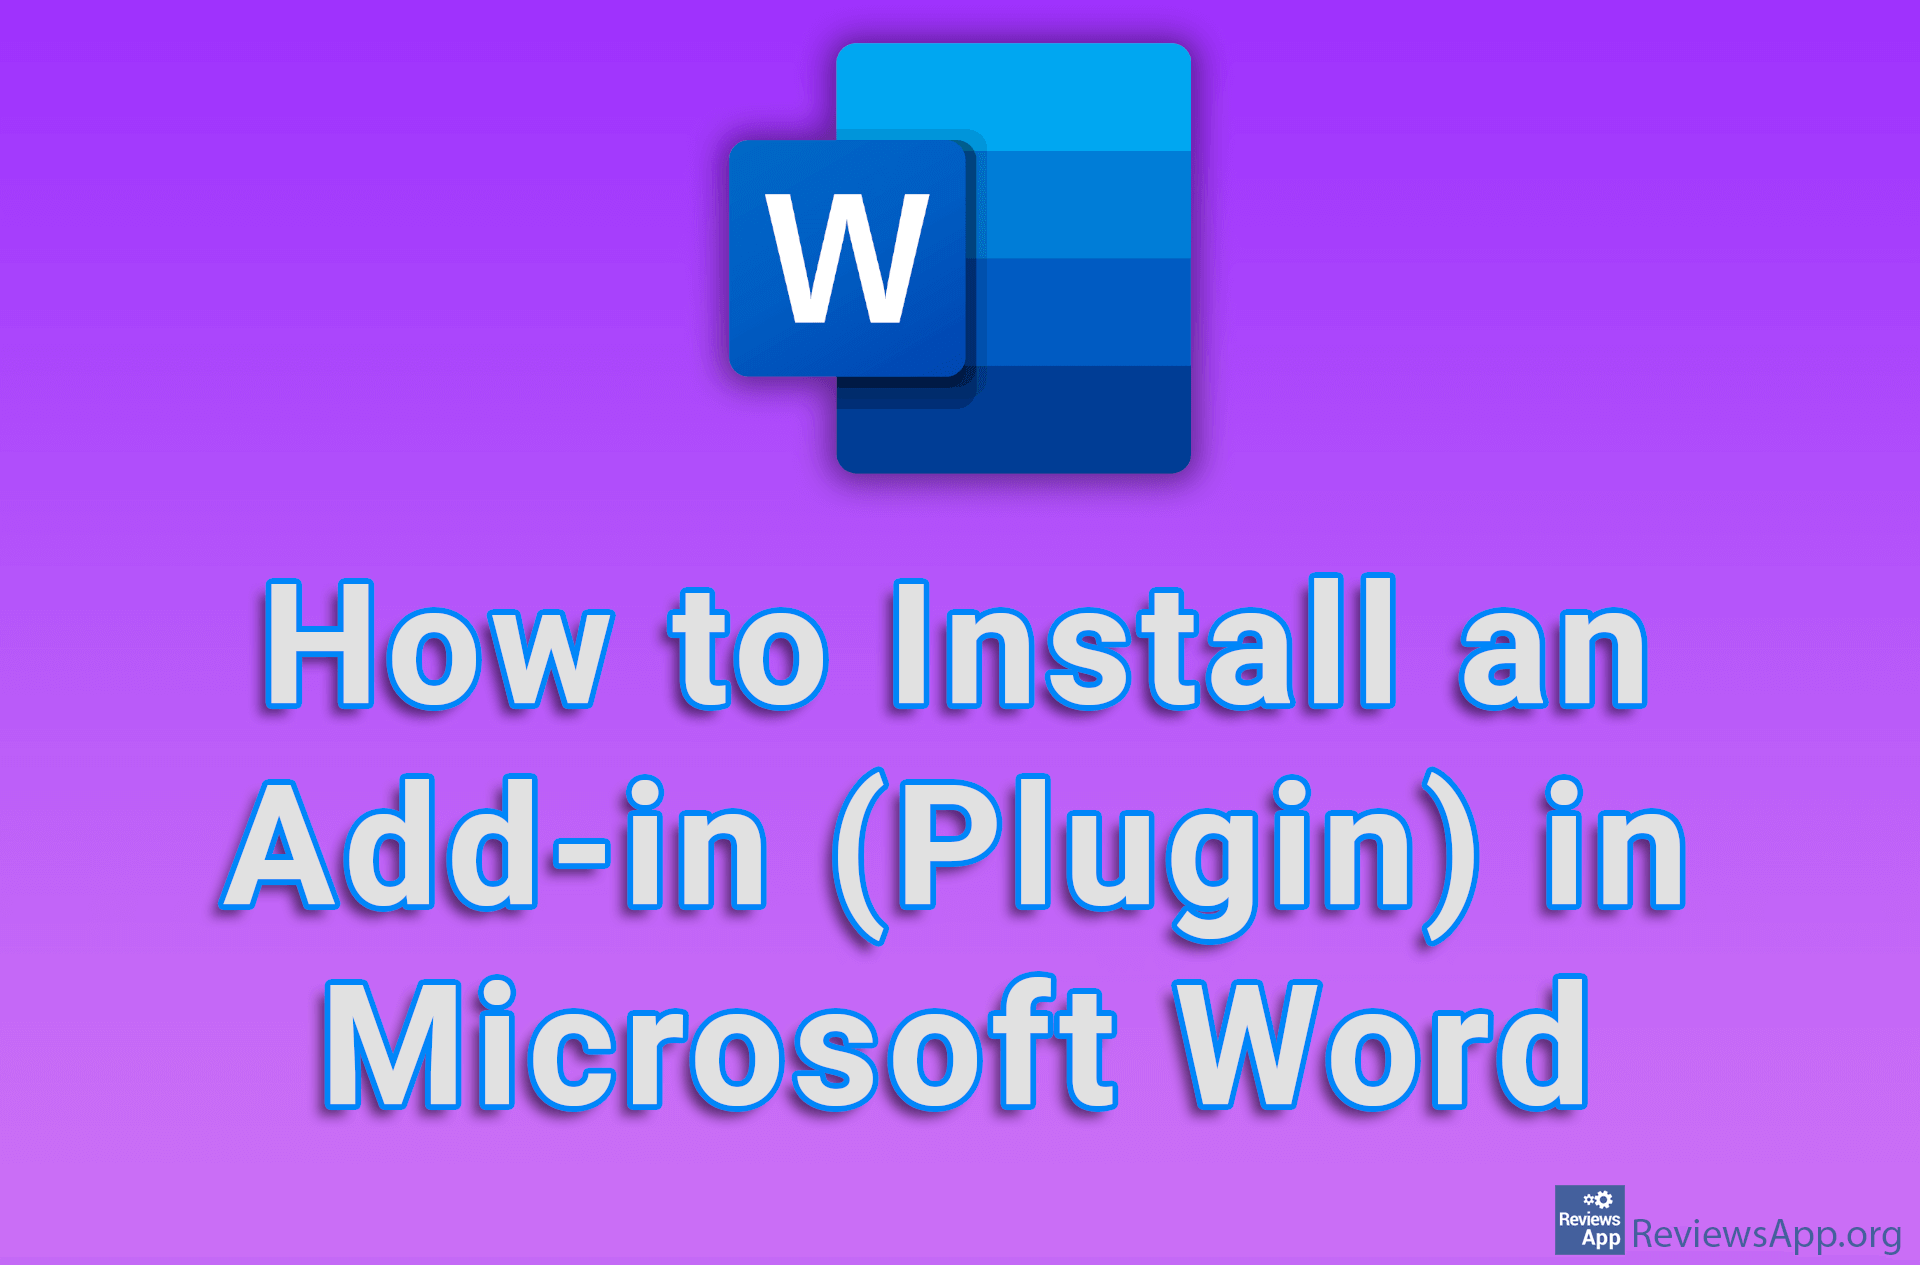 How to Install an Add-in (Plugin) in Microsoft Word